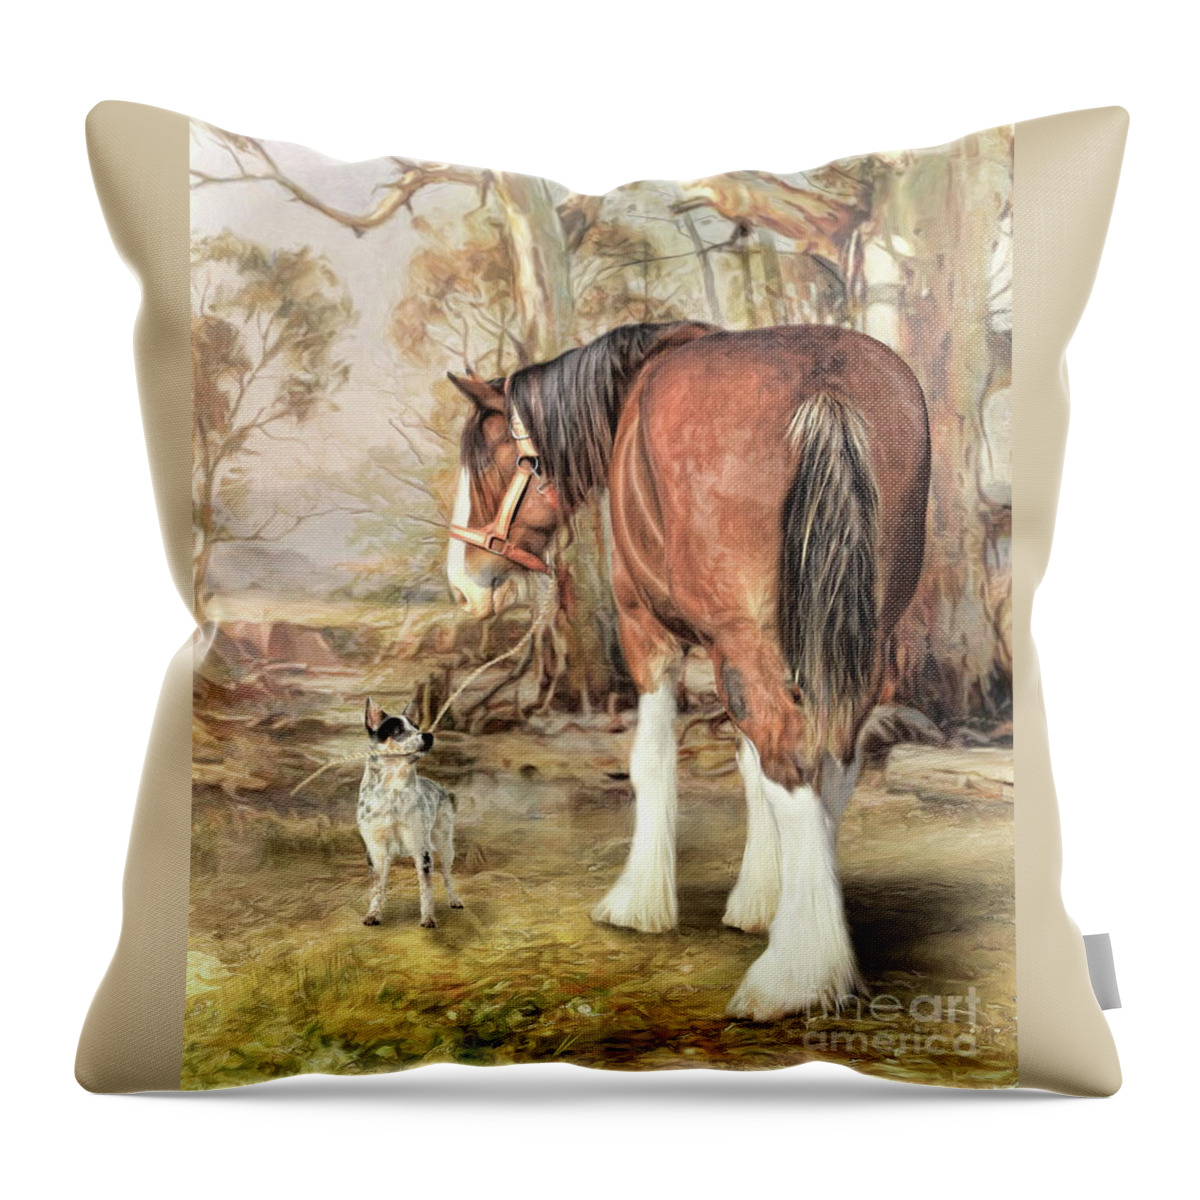 Clydesdale Throw Pillow featuring the digital art Workmates by Trudi Simmonds